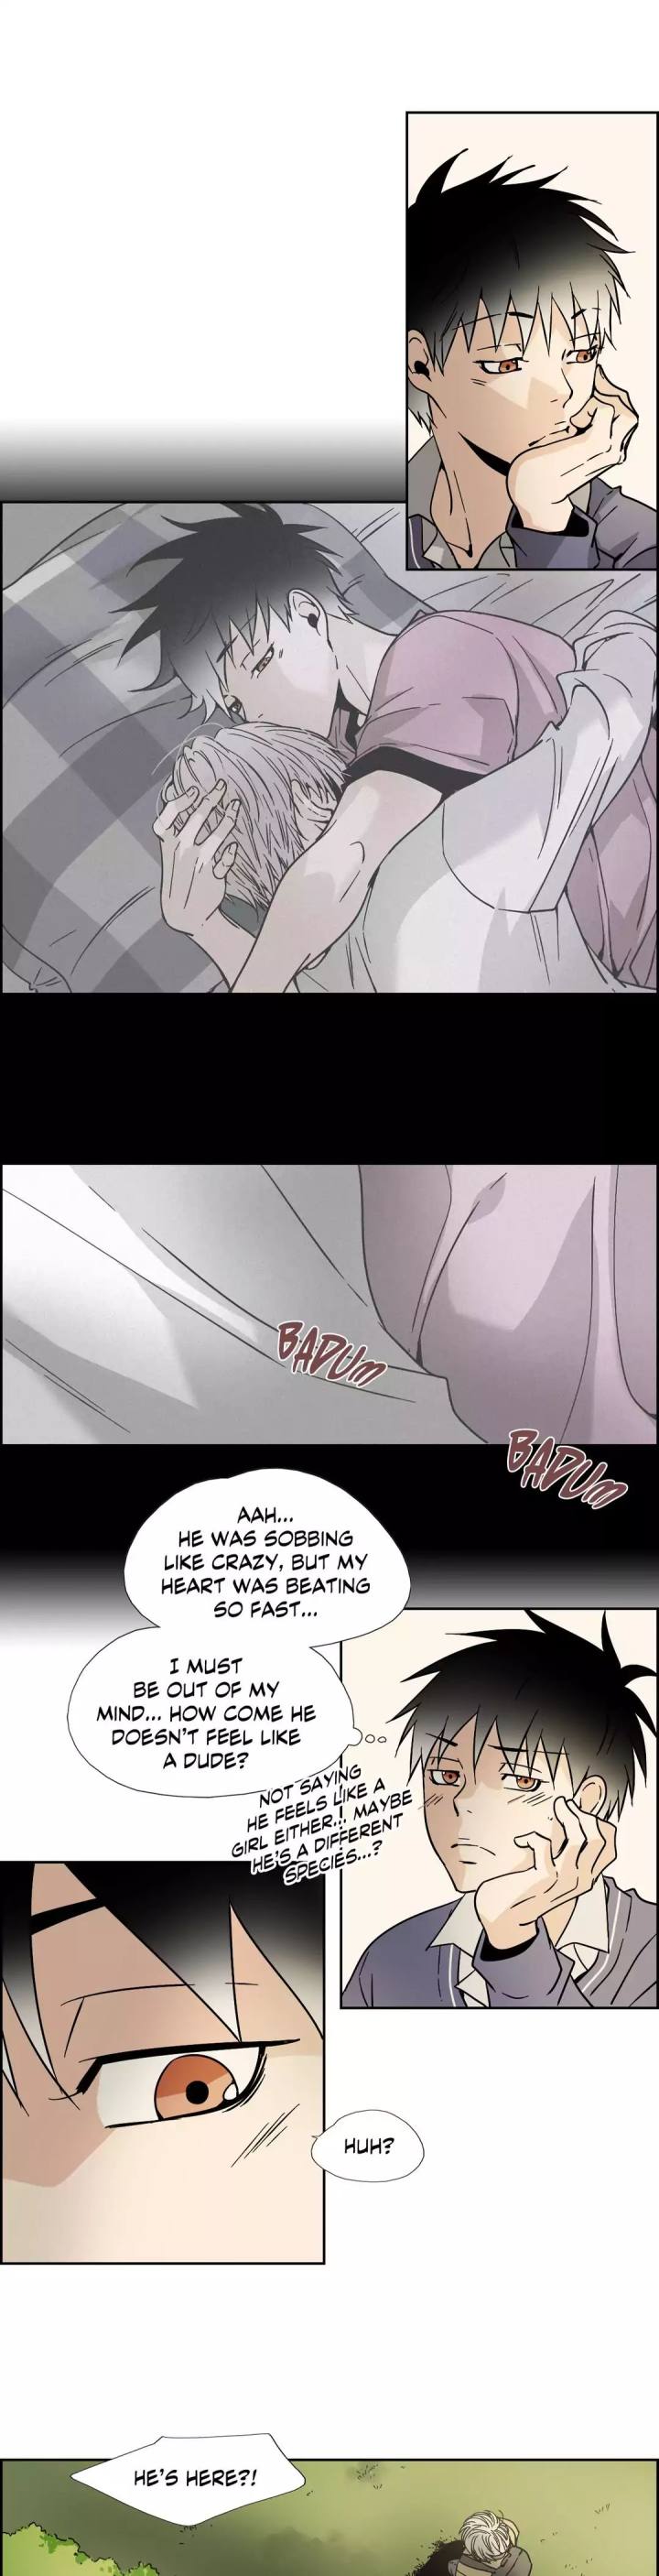 An Innocent Sin - Chapter 2 Page 5